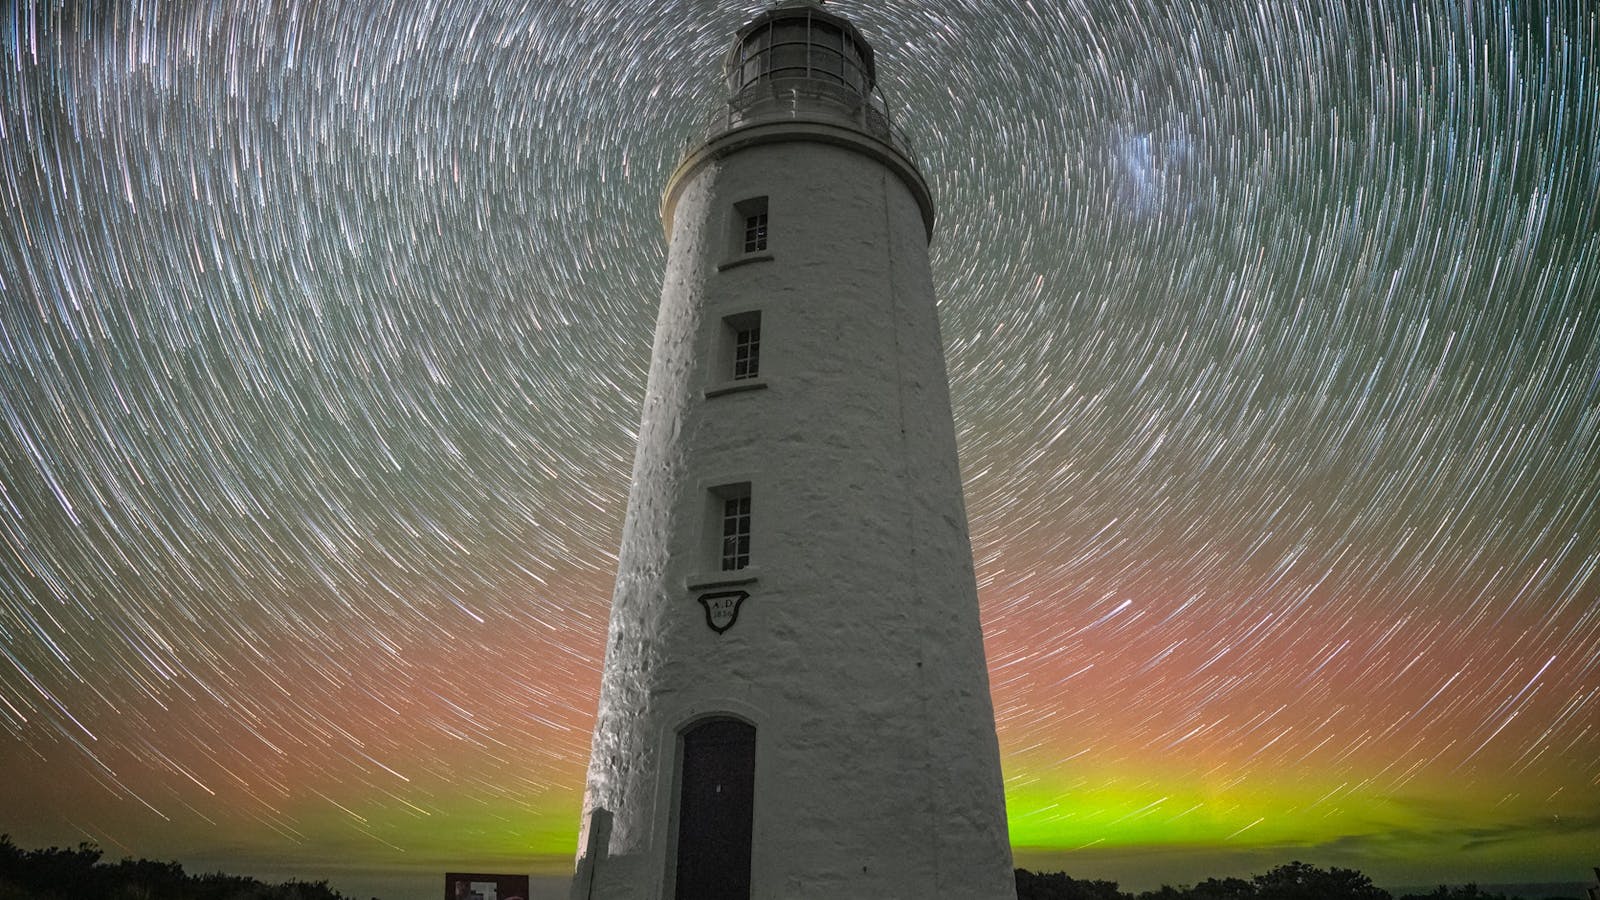 Cape Bruny Lighthouse star trail back-lit by Aurora australis